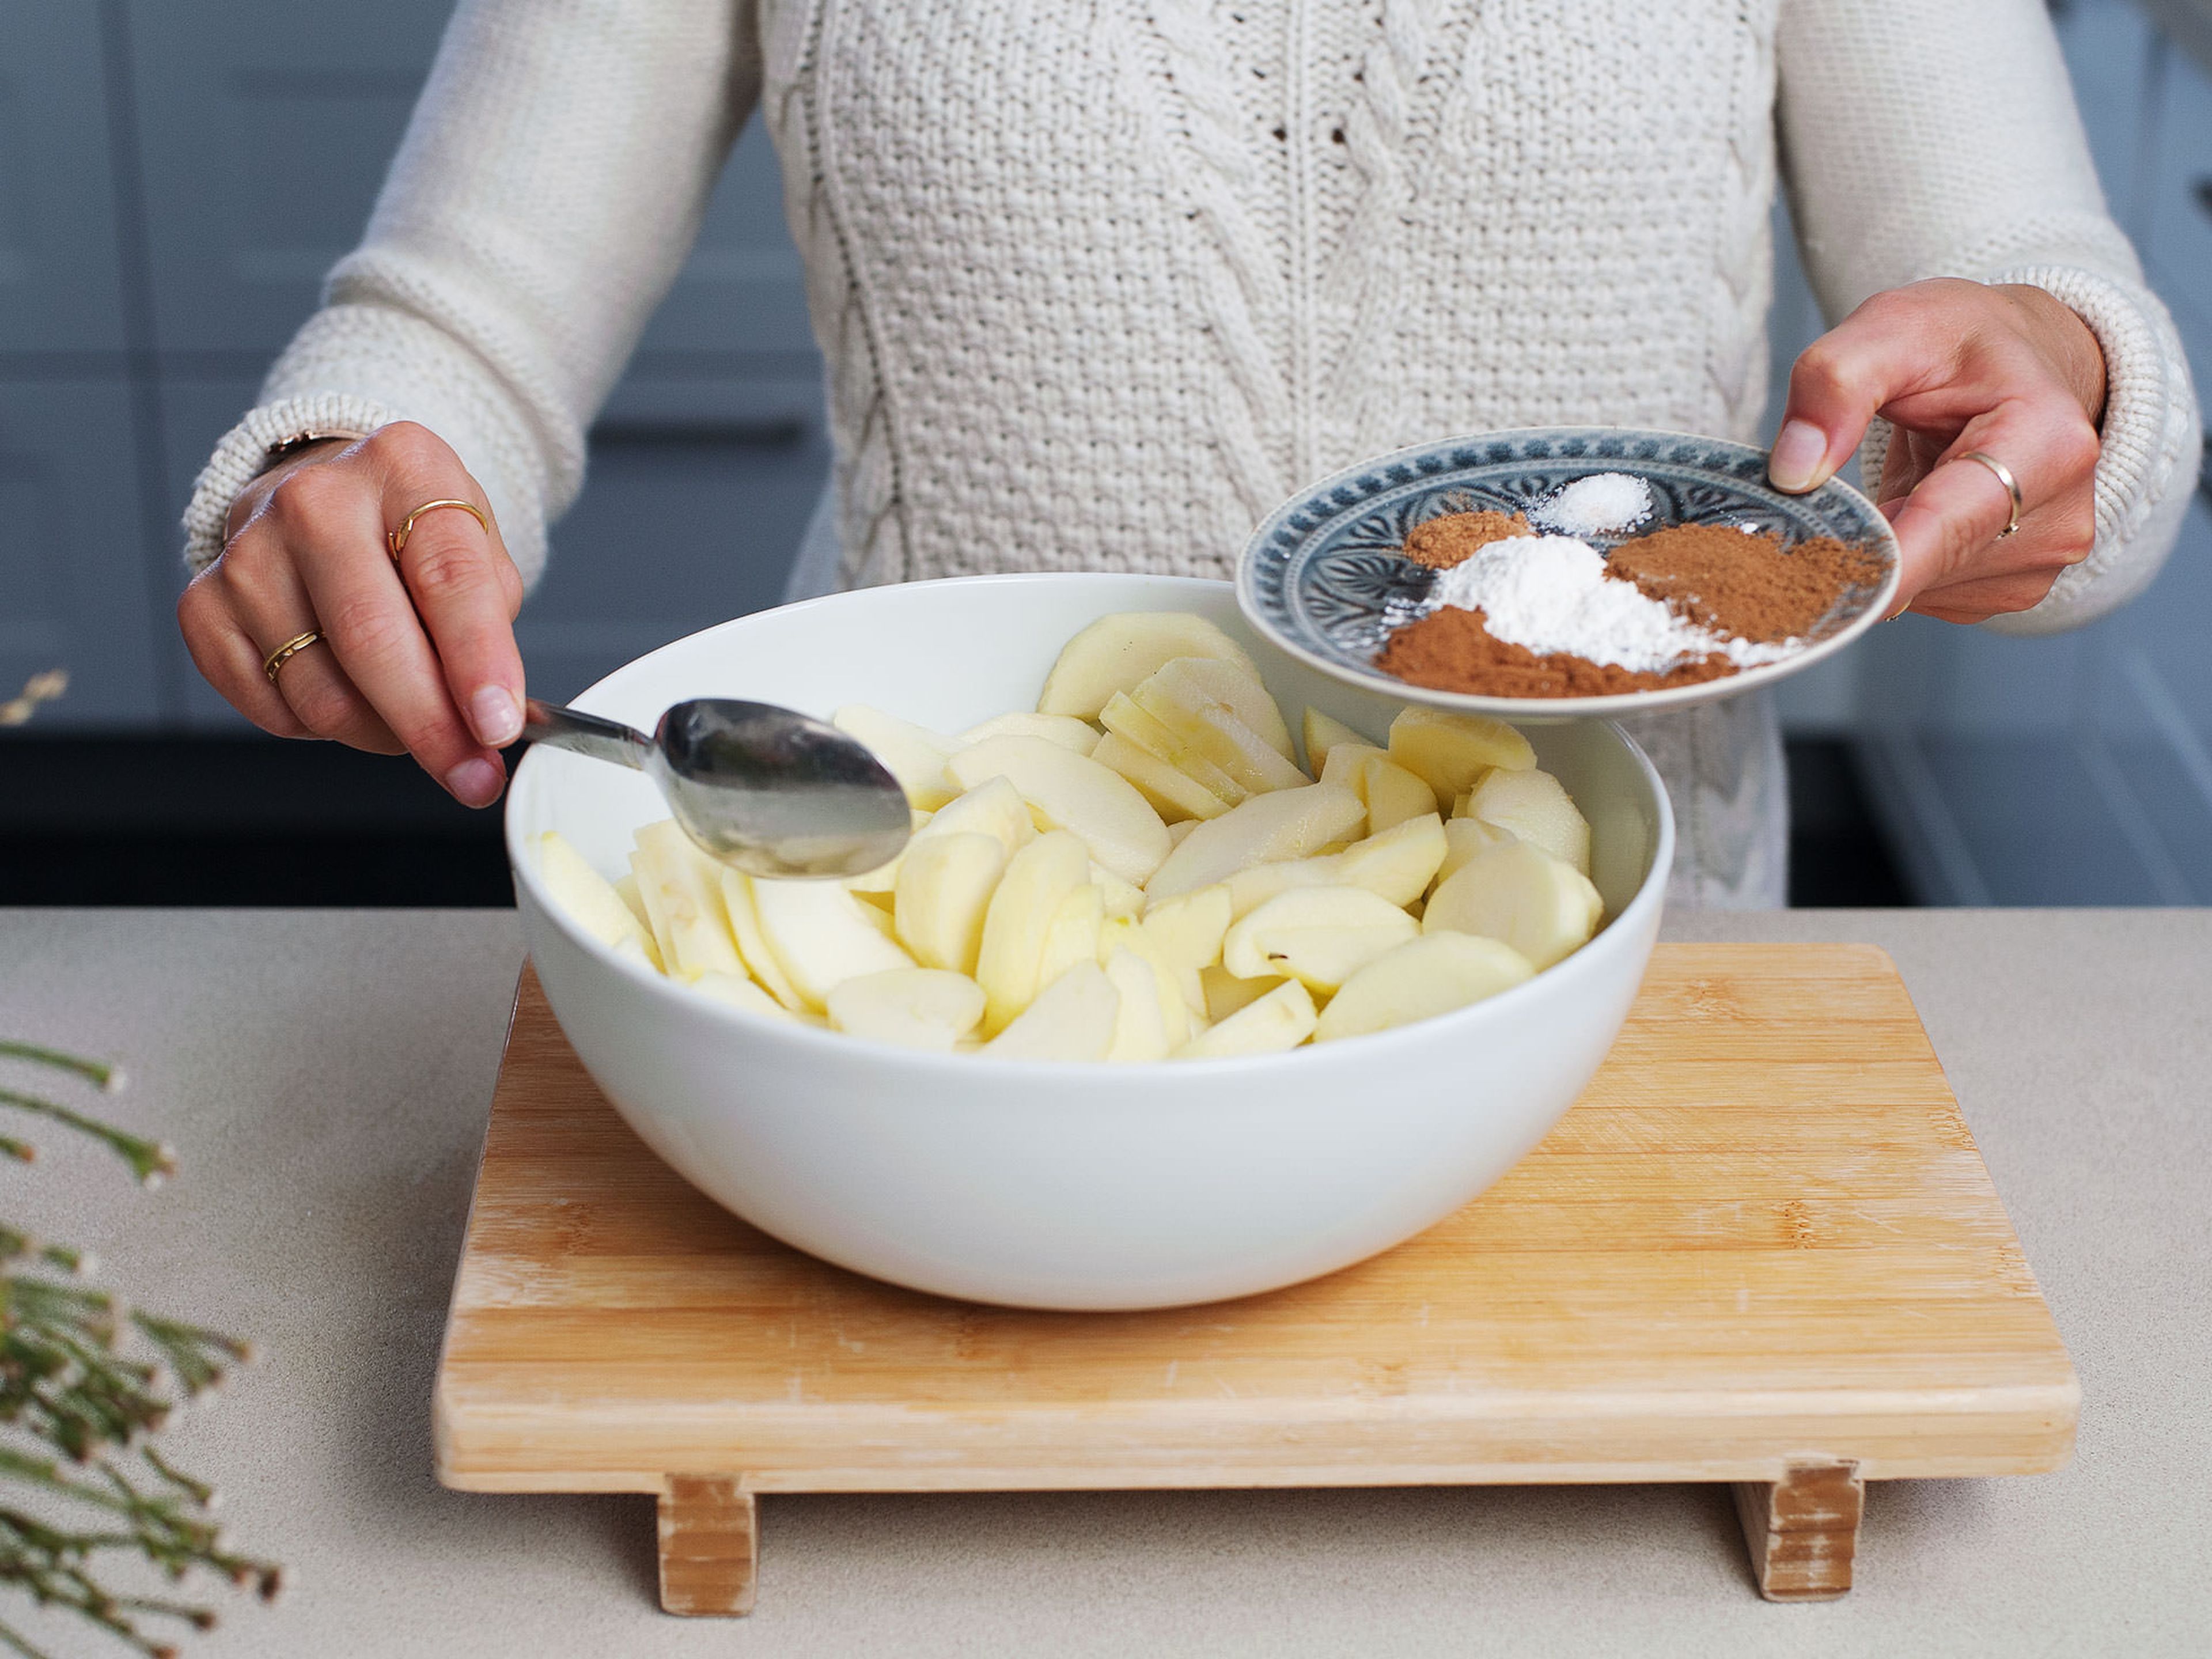 In a large bowl, thoroughly mix apple slices, some cinnamon, nutmeg, lemon juice, agave syrup, arrowroot flour, coconut sugar, speculaas spice, and salt.